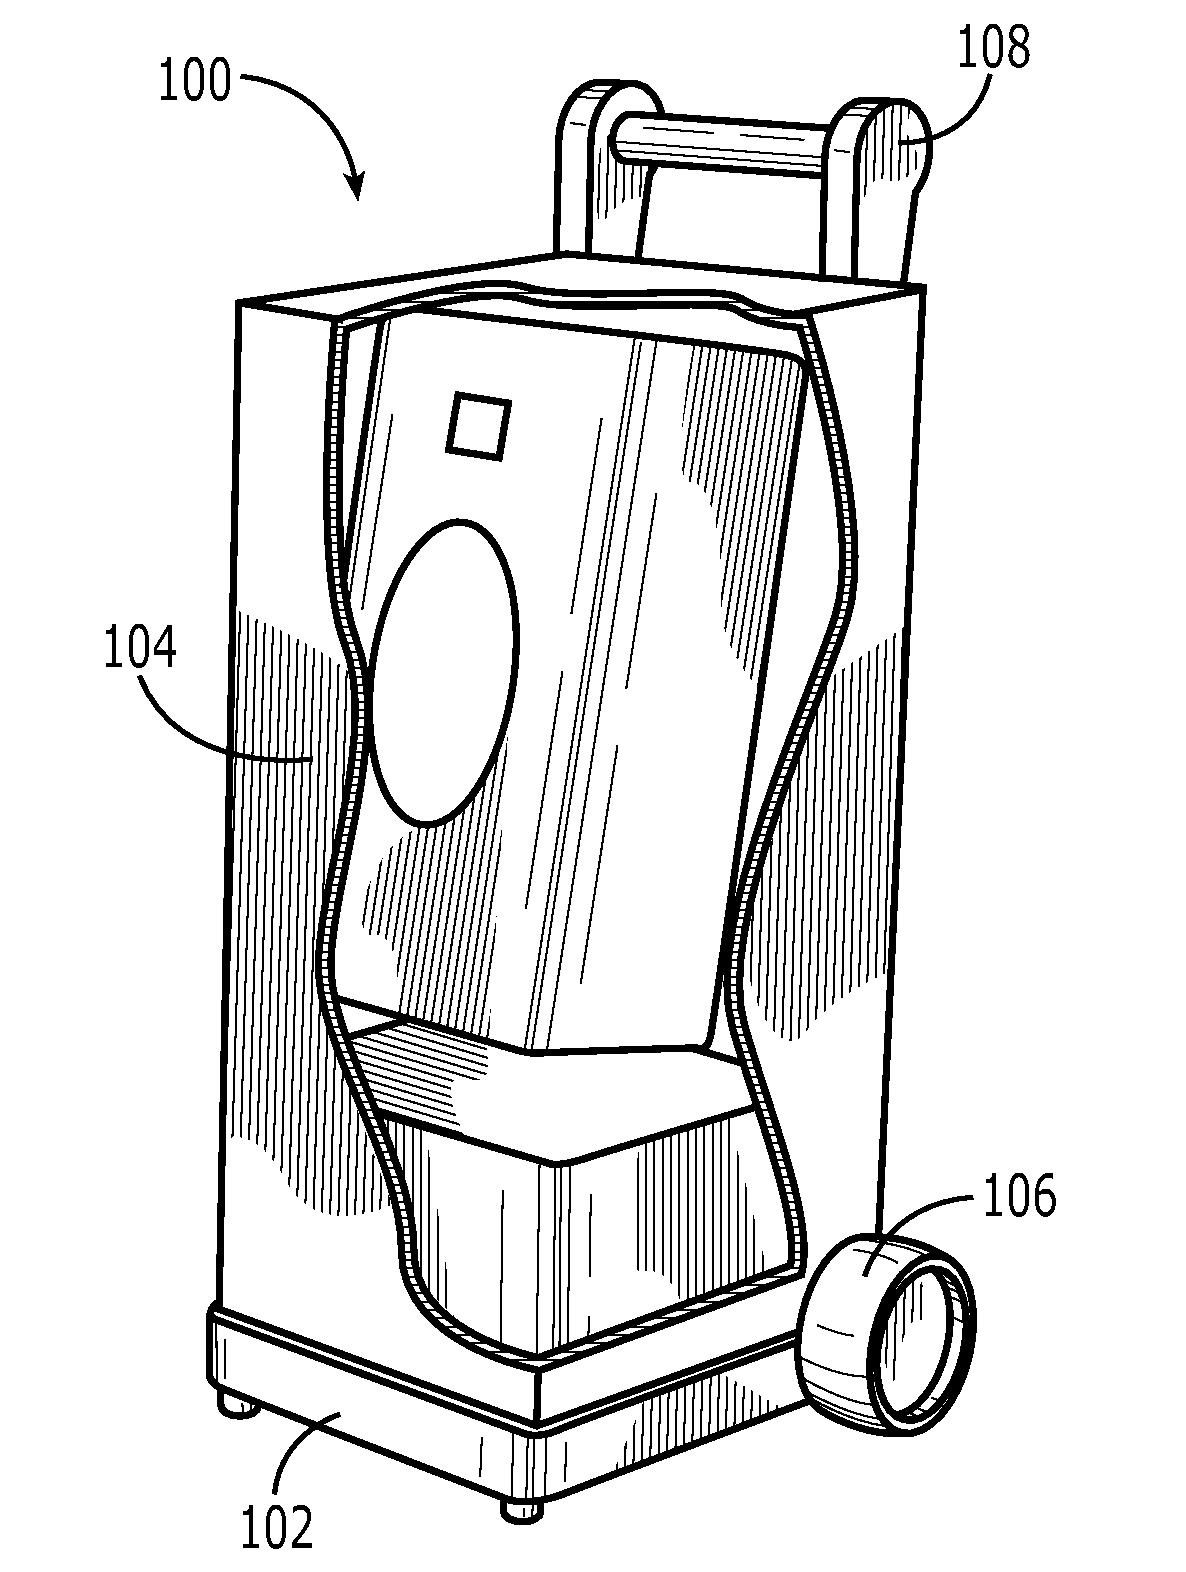 System for the rapid deployment of a concealed object detection system